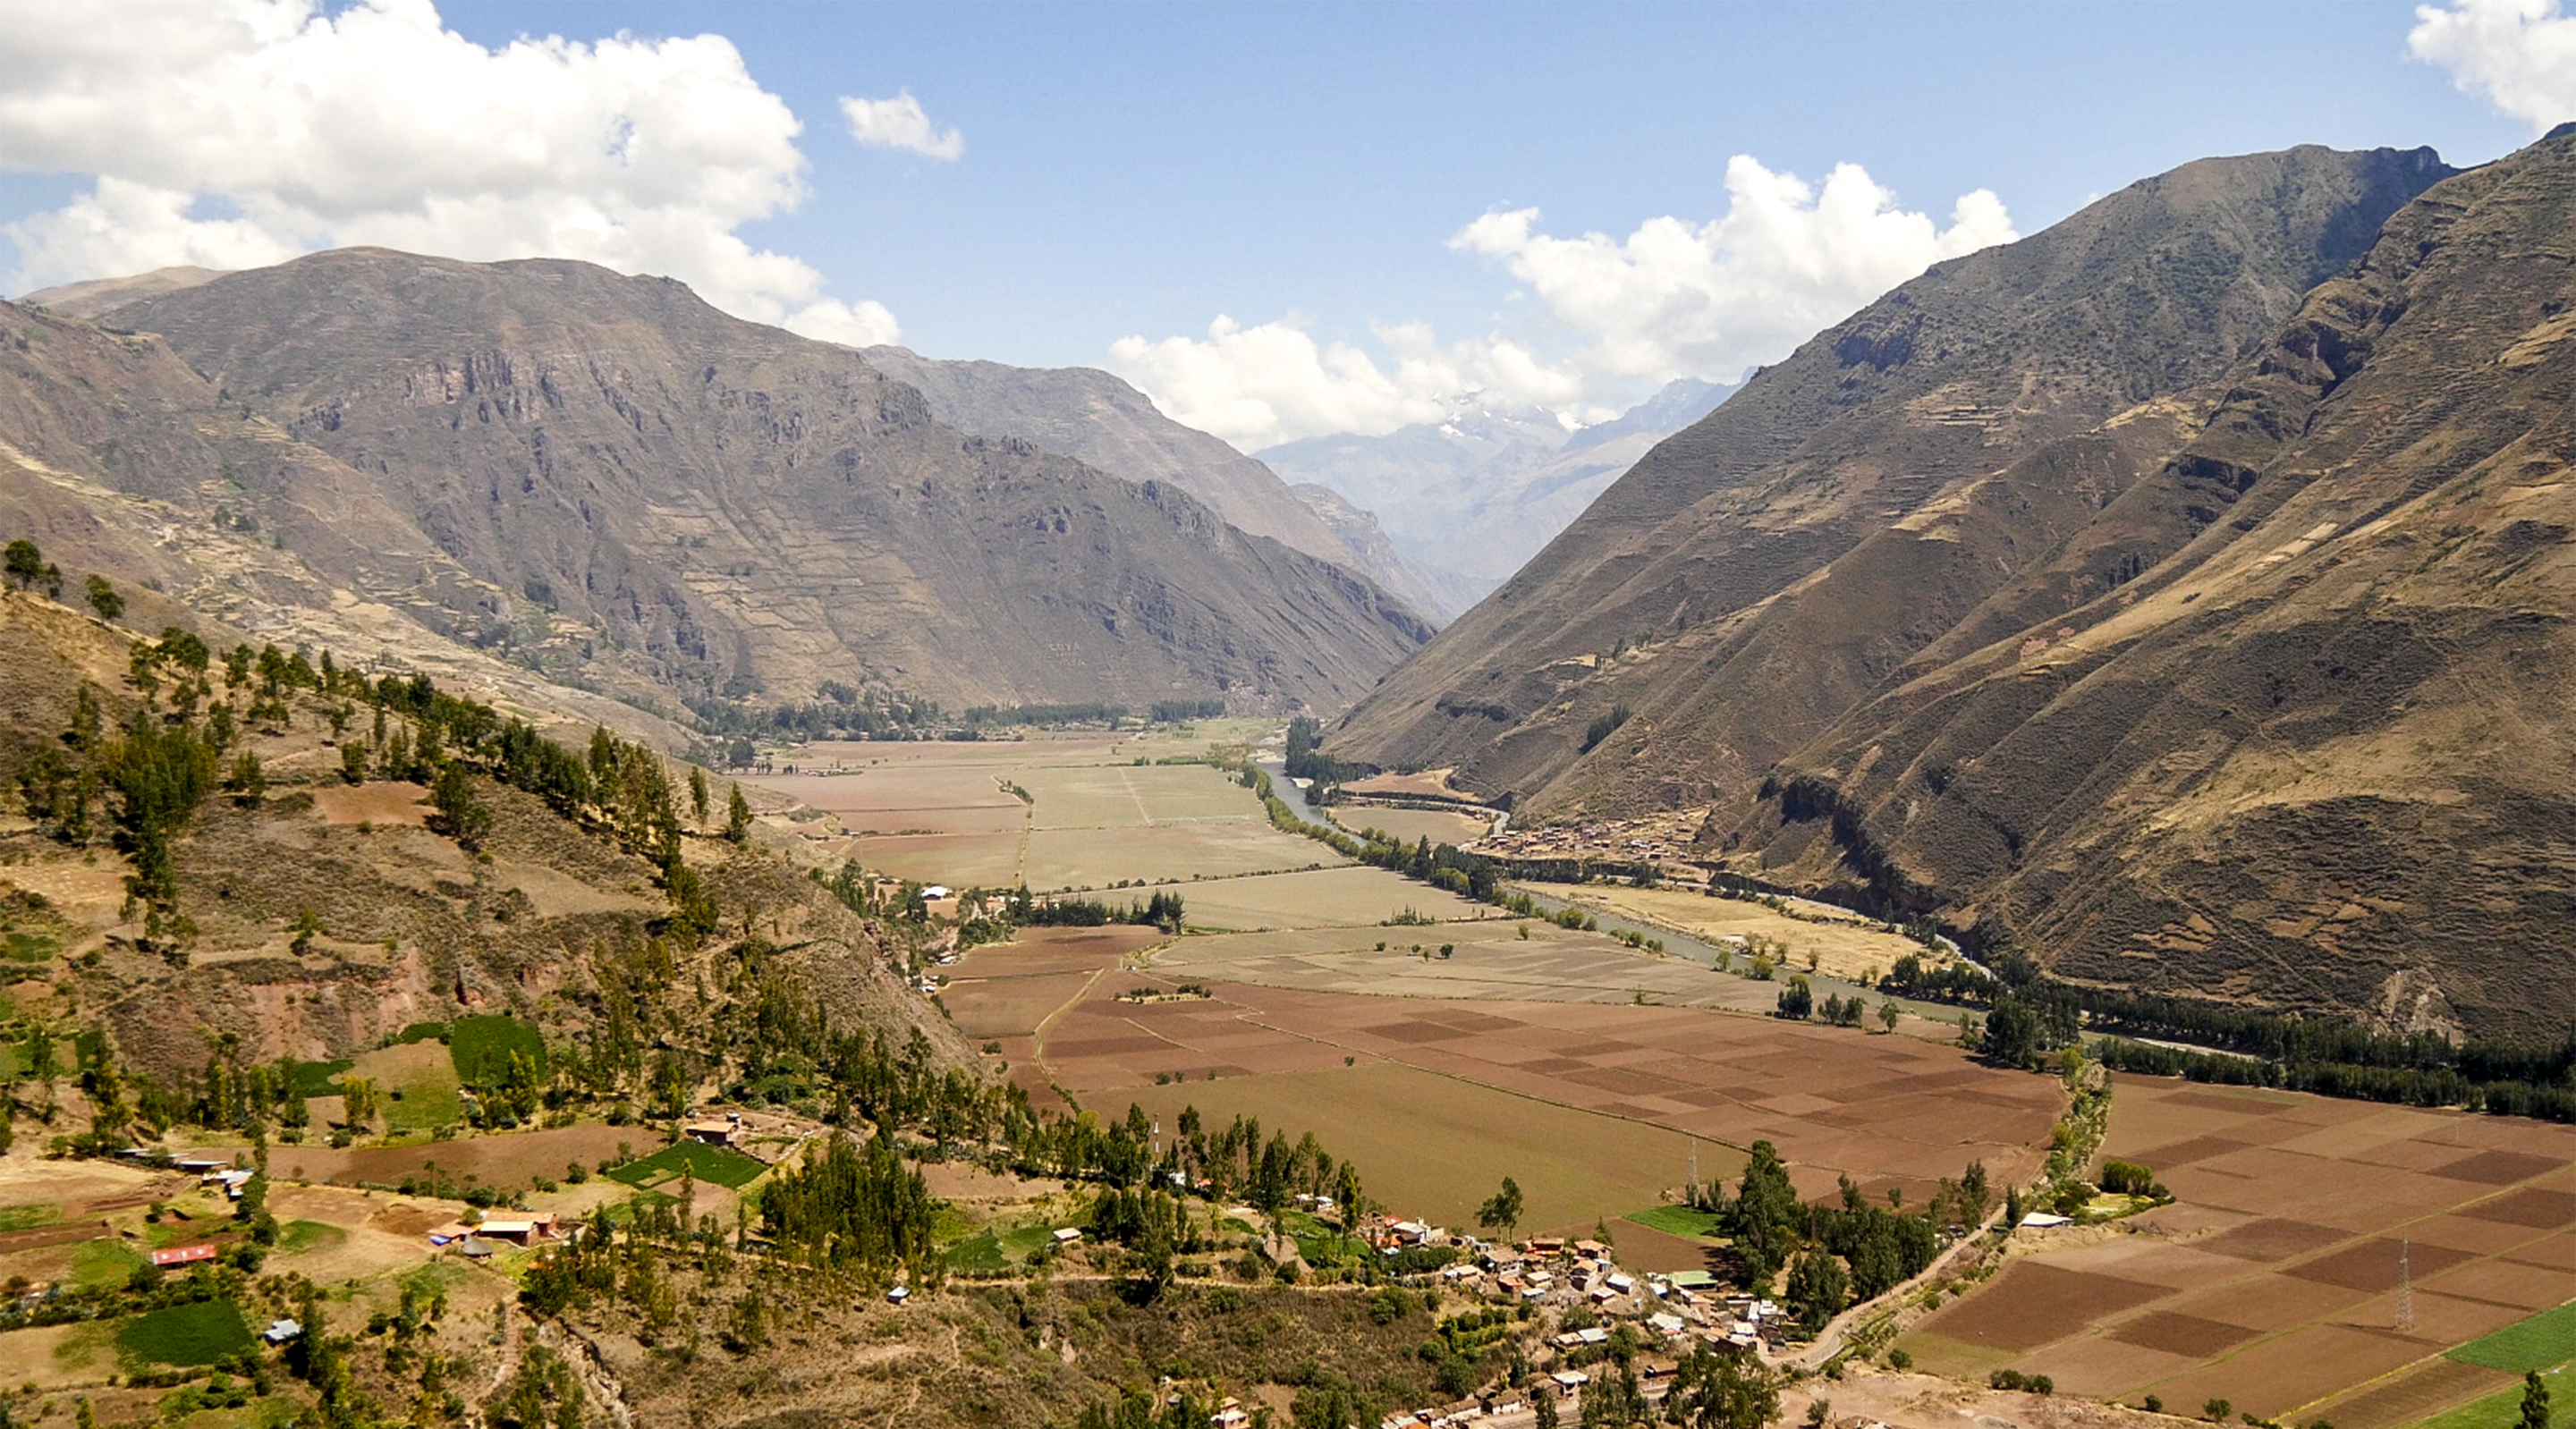 Cross the ancient valley of the Incas and learn about their amazing culture. 